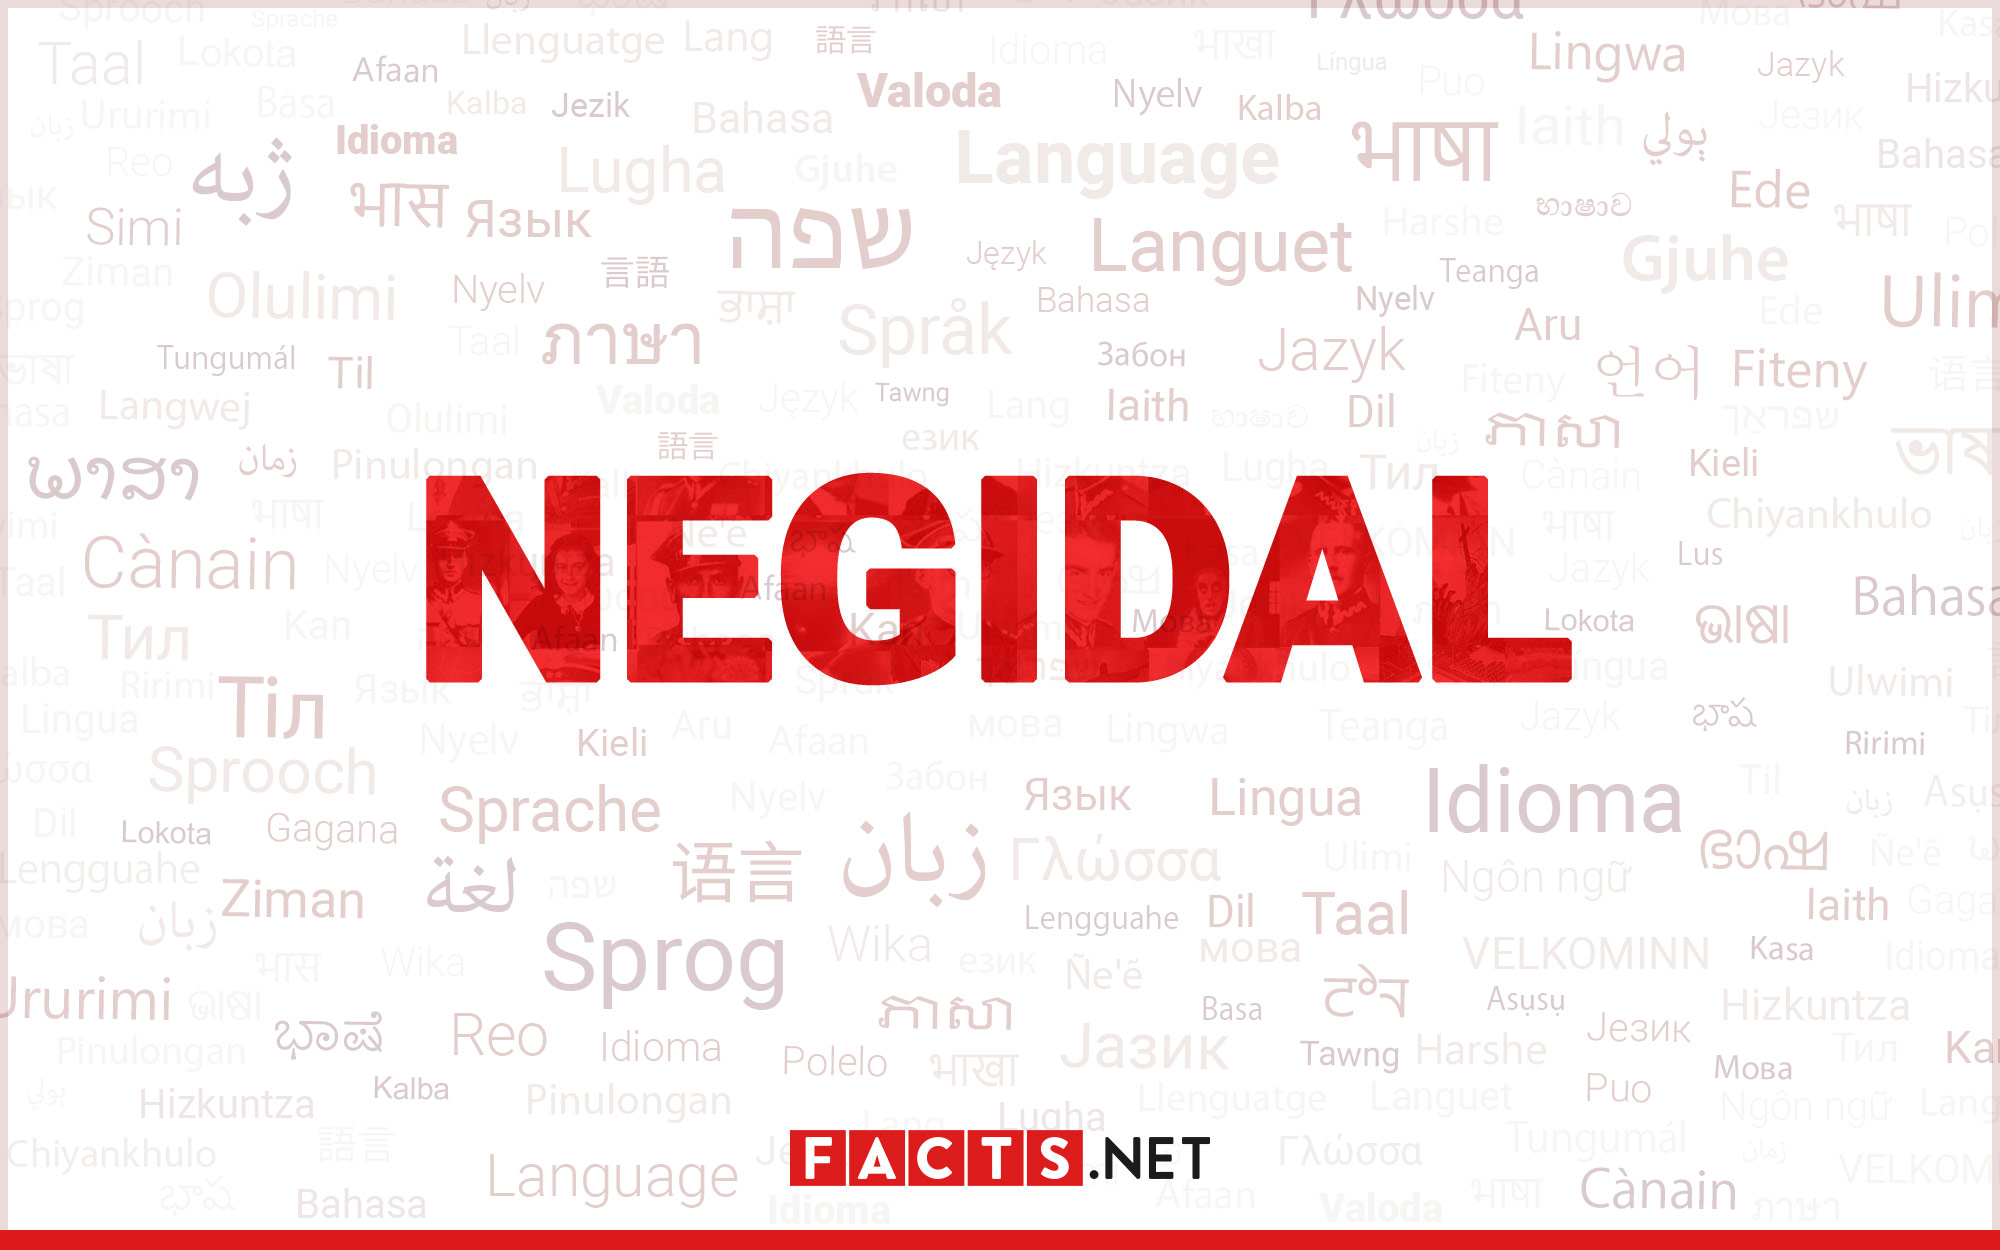 8-captivating-facts-about-negidal